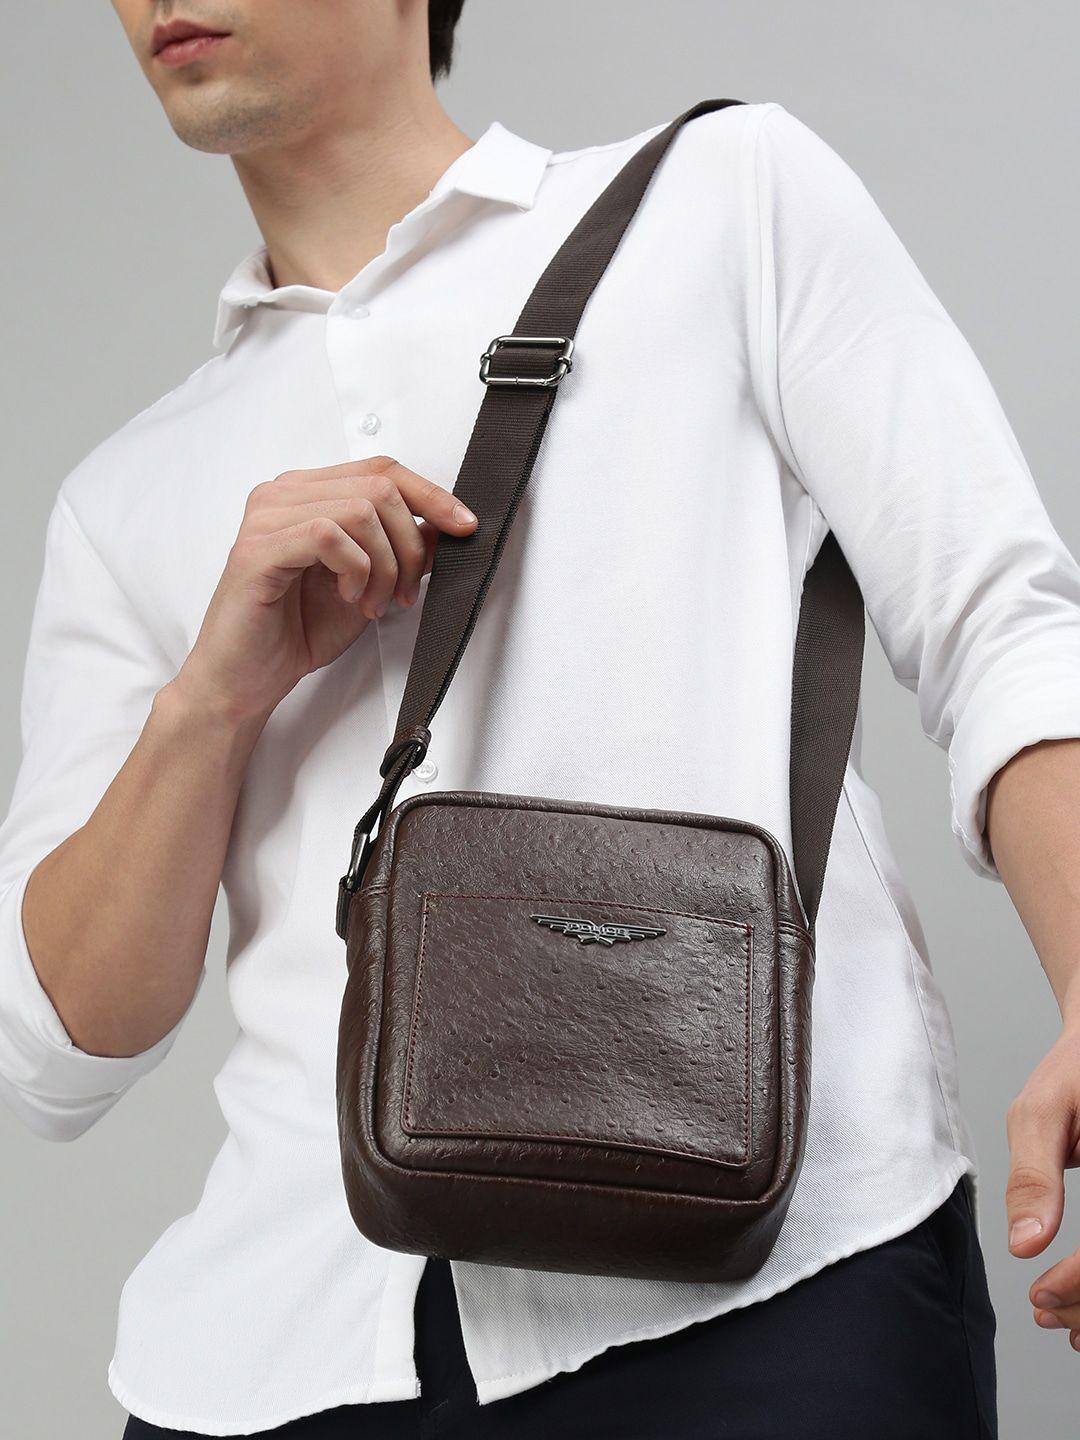 police brown leather structured cross body bag